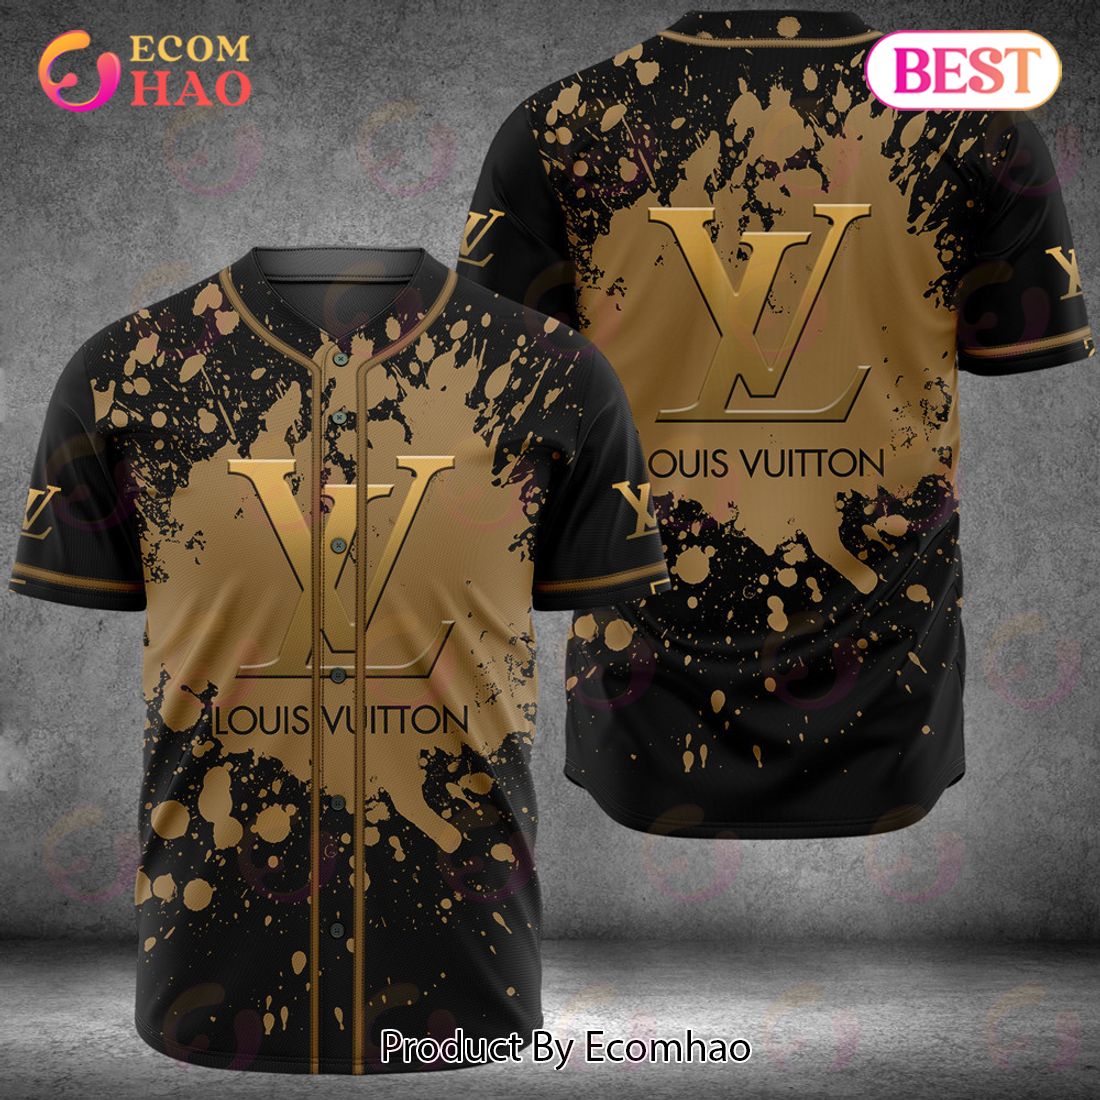 Louis Vuitton Brown Black Color Luxury Brand Jersey Limited Edition